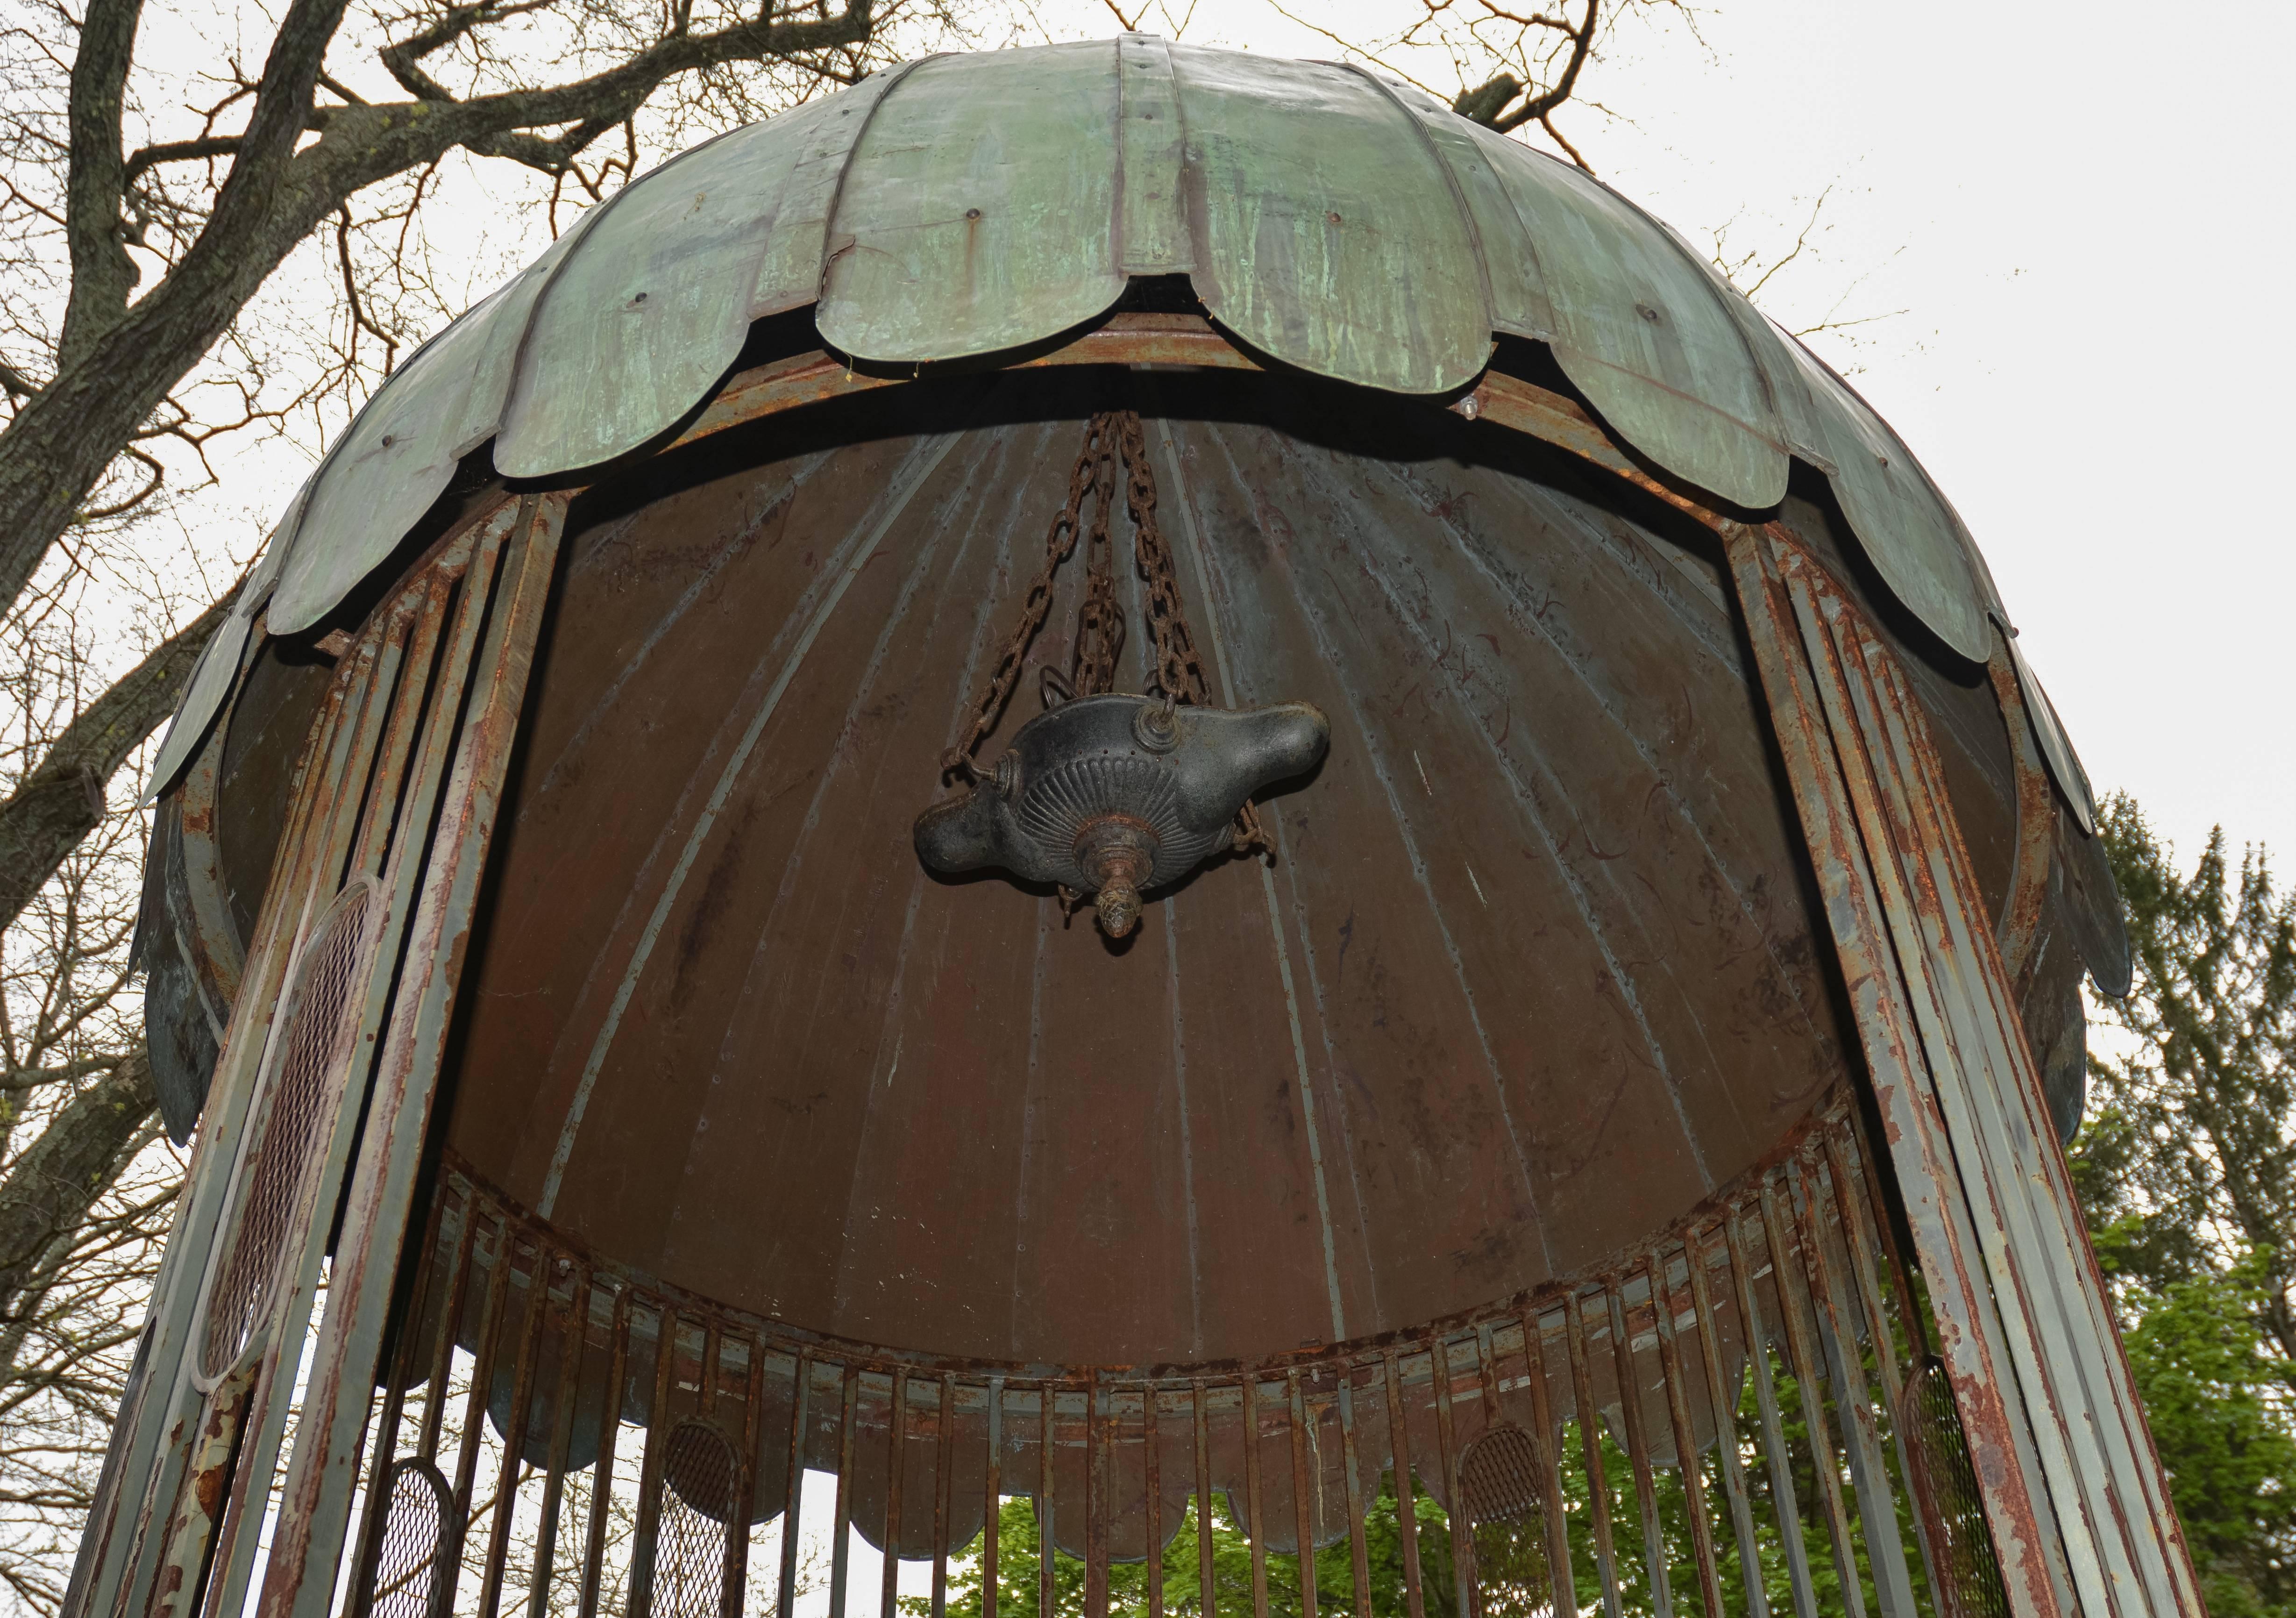 Gazebo with Copper Roof and Wrought-Iron Elements 2